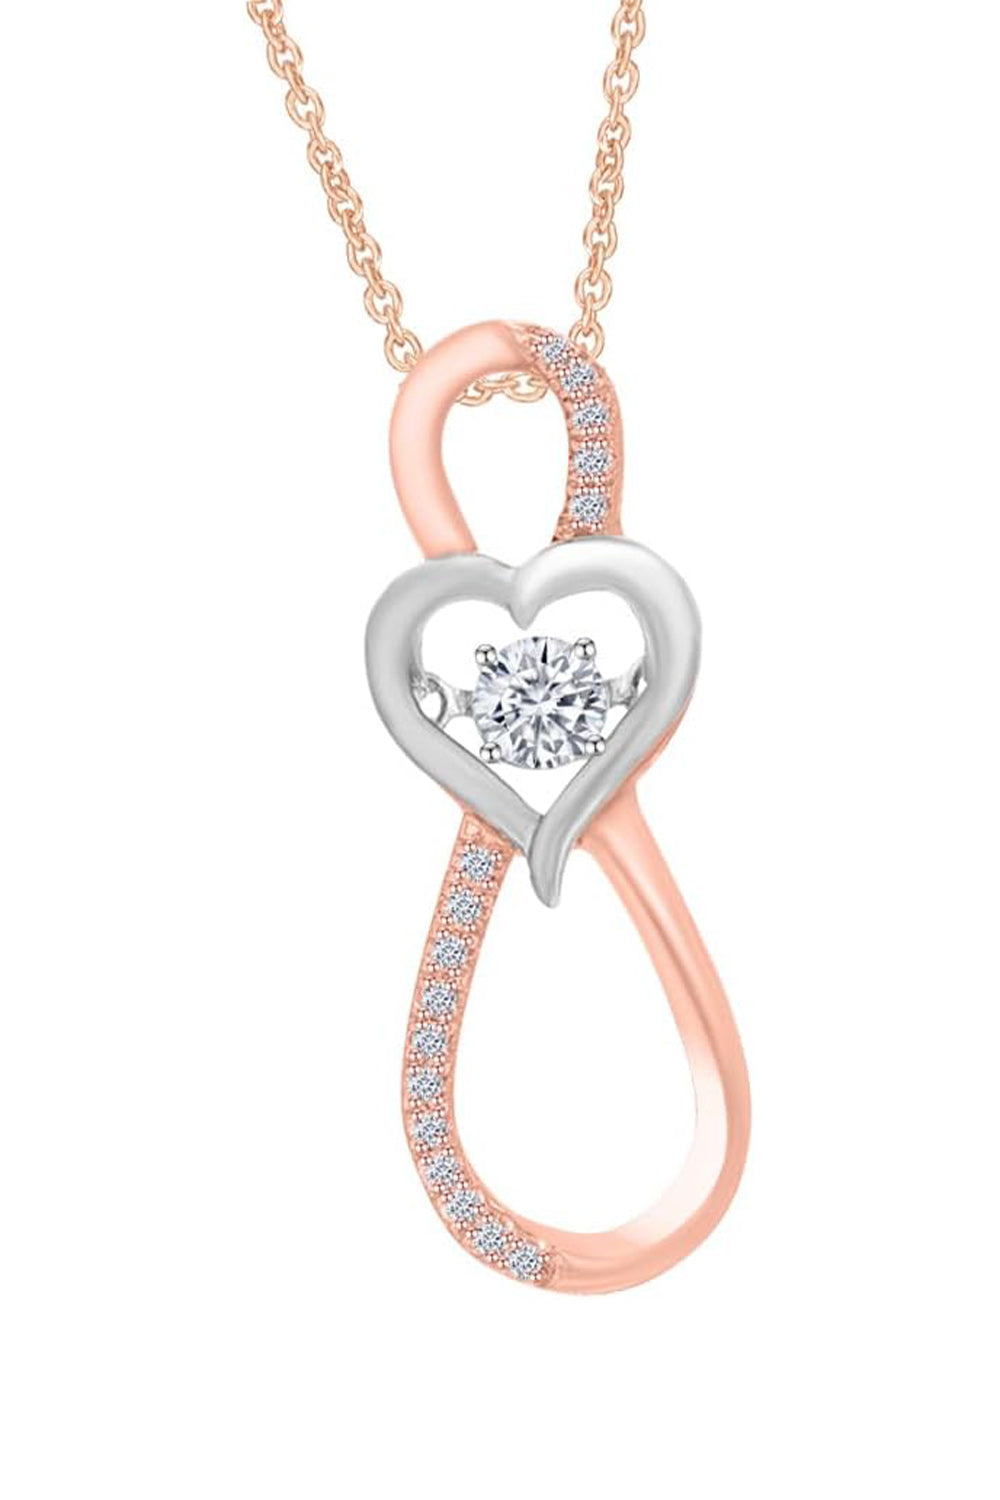 Rose Gold Color Infinity with Heart Pendant Necklace